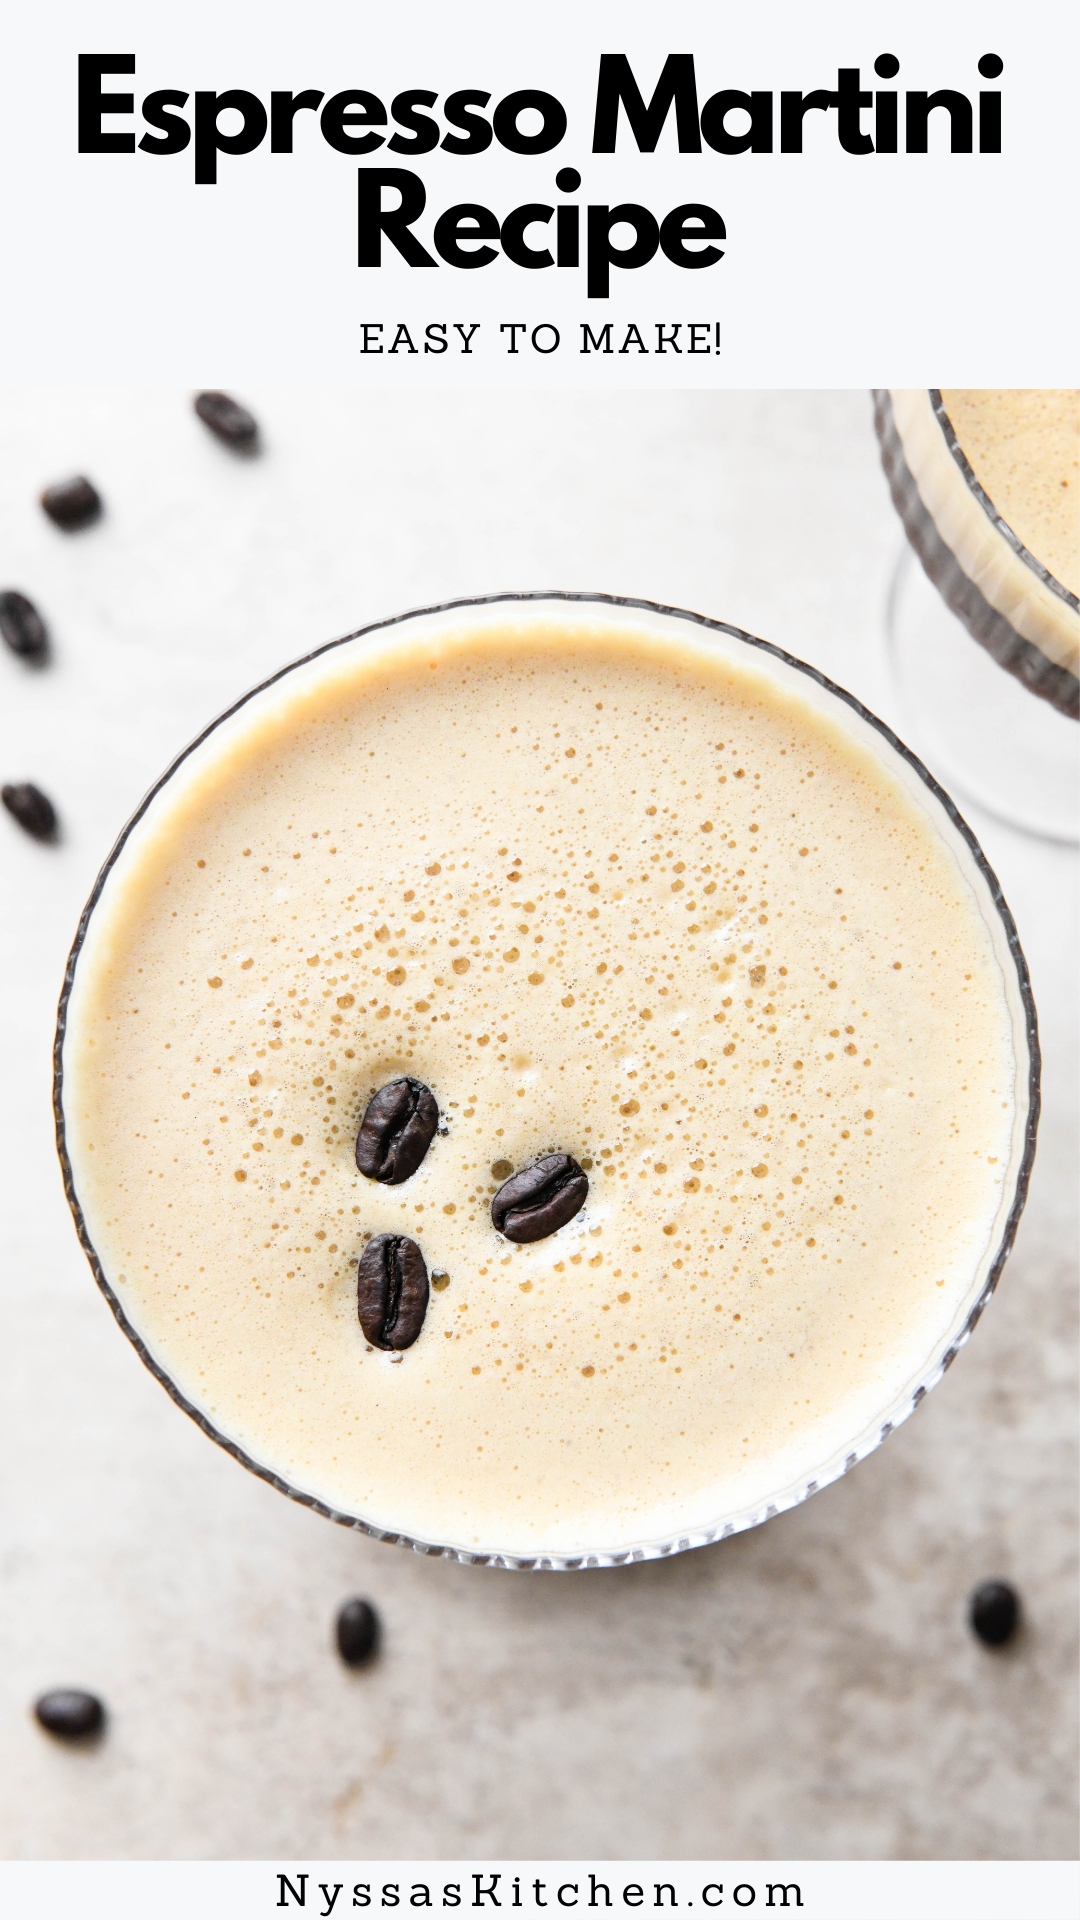 Let's make espresso martinis at home! This easy espresso martini recipe is a bold and sweet cocktail with a foamy top that is a total crowd pleaser! The perfect after dinner drink made with a few simple ingredients and topped with coffee beans. Simple, easy, and delicious!